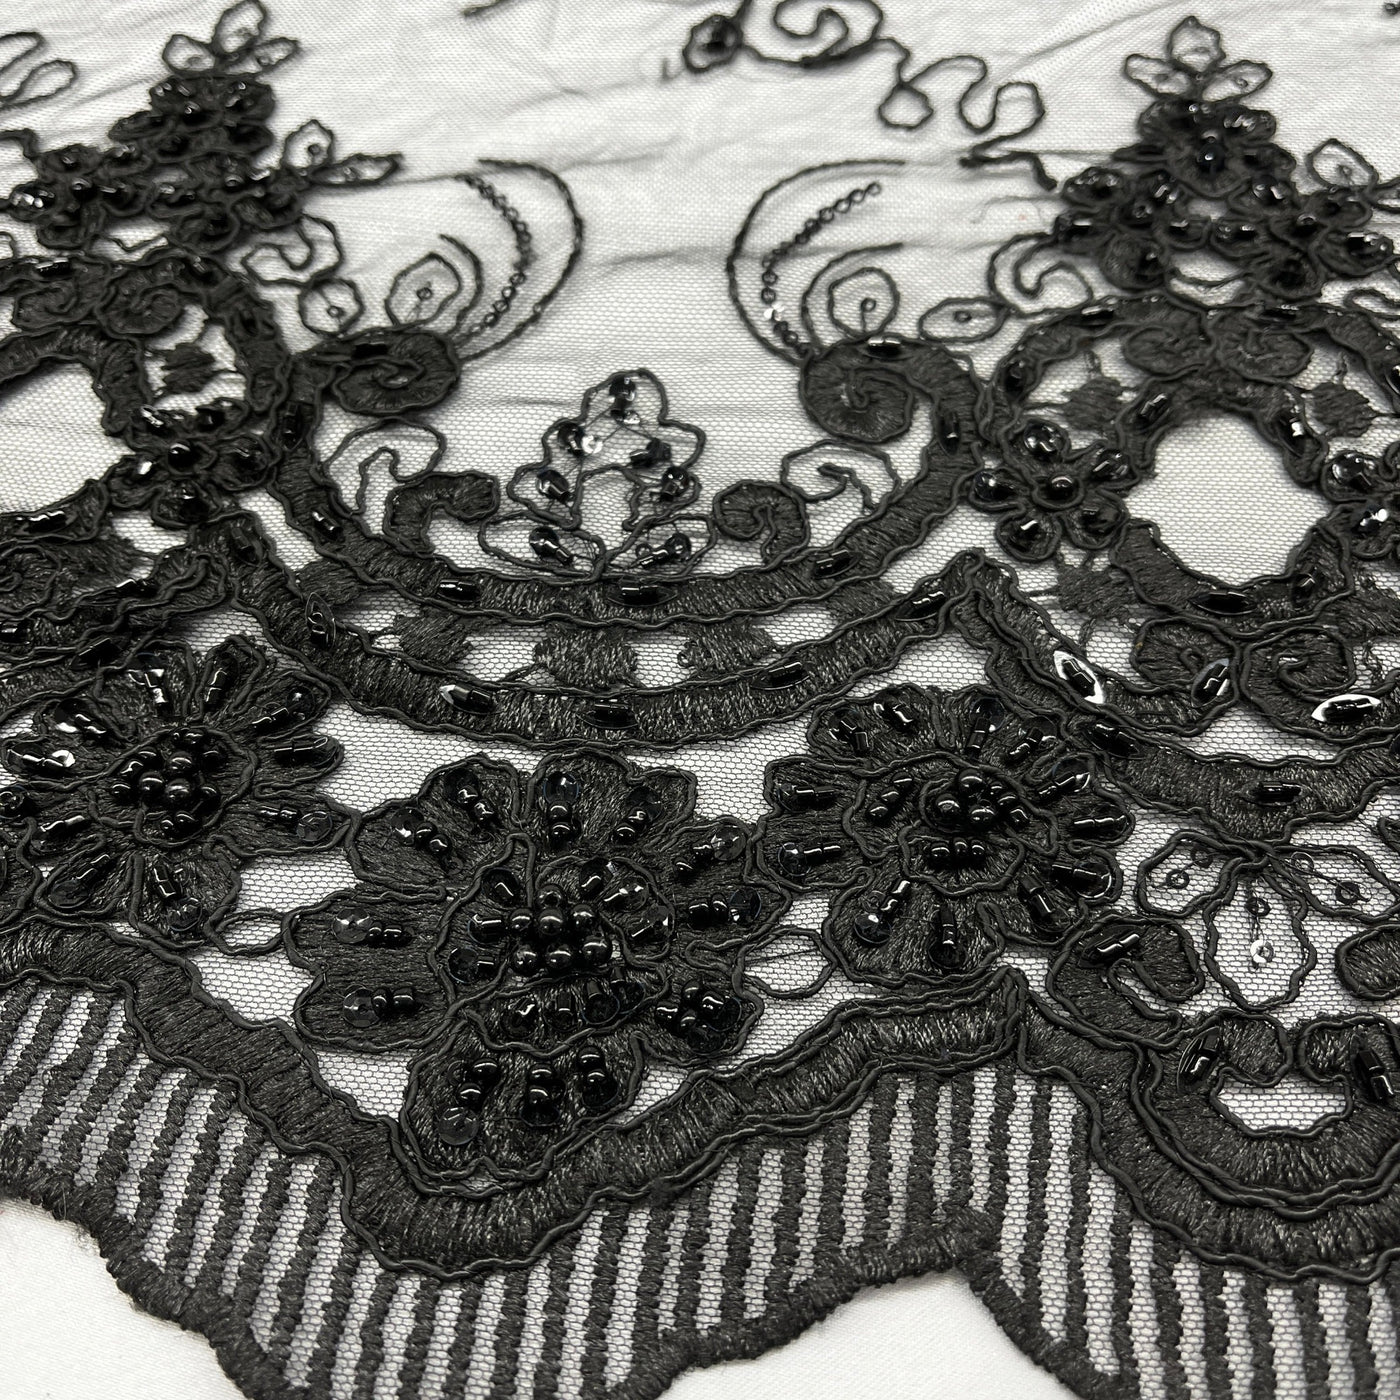 Beaded & Corded Bridal Lace Fabric Embroidered on 100% Polyester Net Mesh | Lace USA - GD-1822 Black